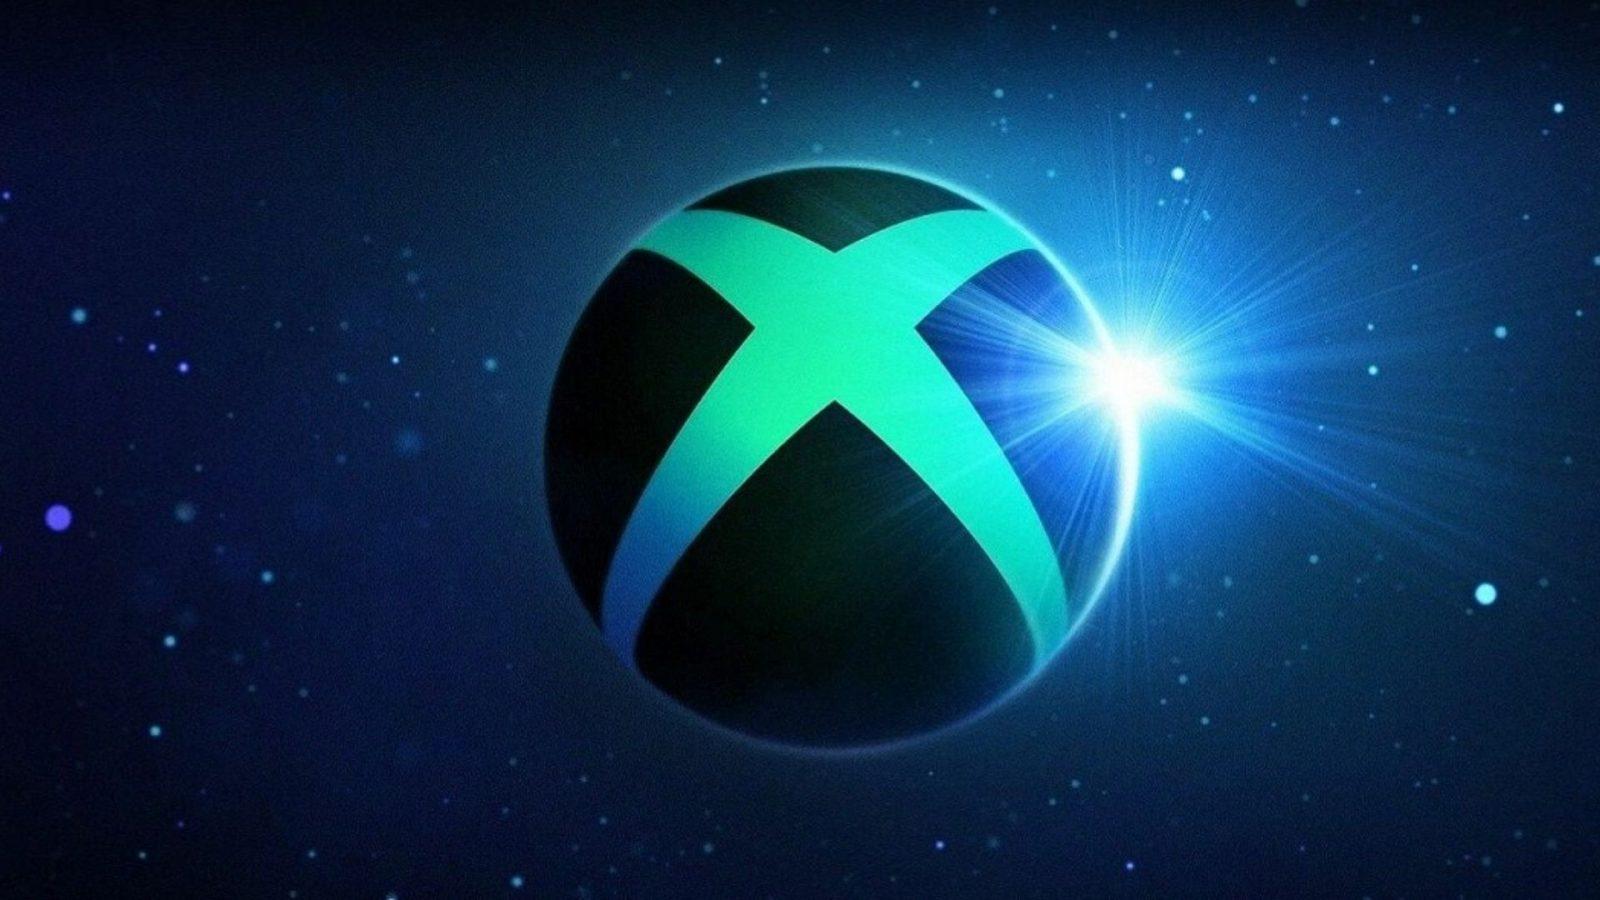 Xbox Games Showcase 2023 and Starfield Direct: the biggest announcements -  The Verge